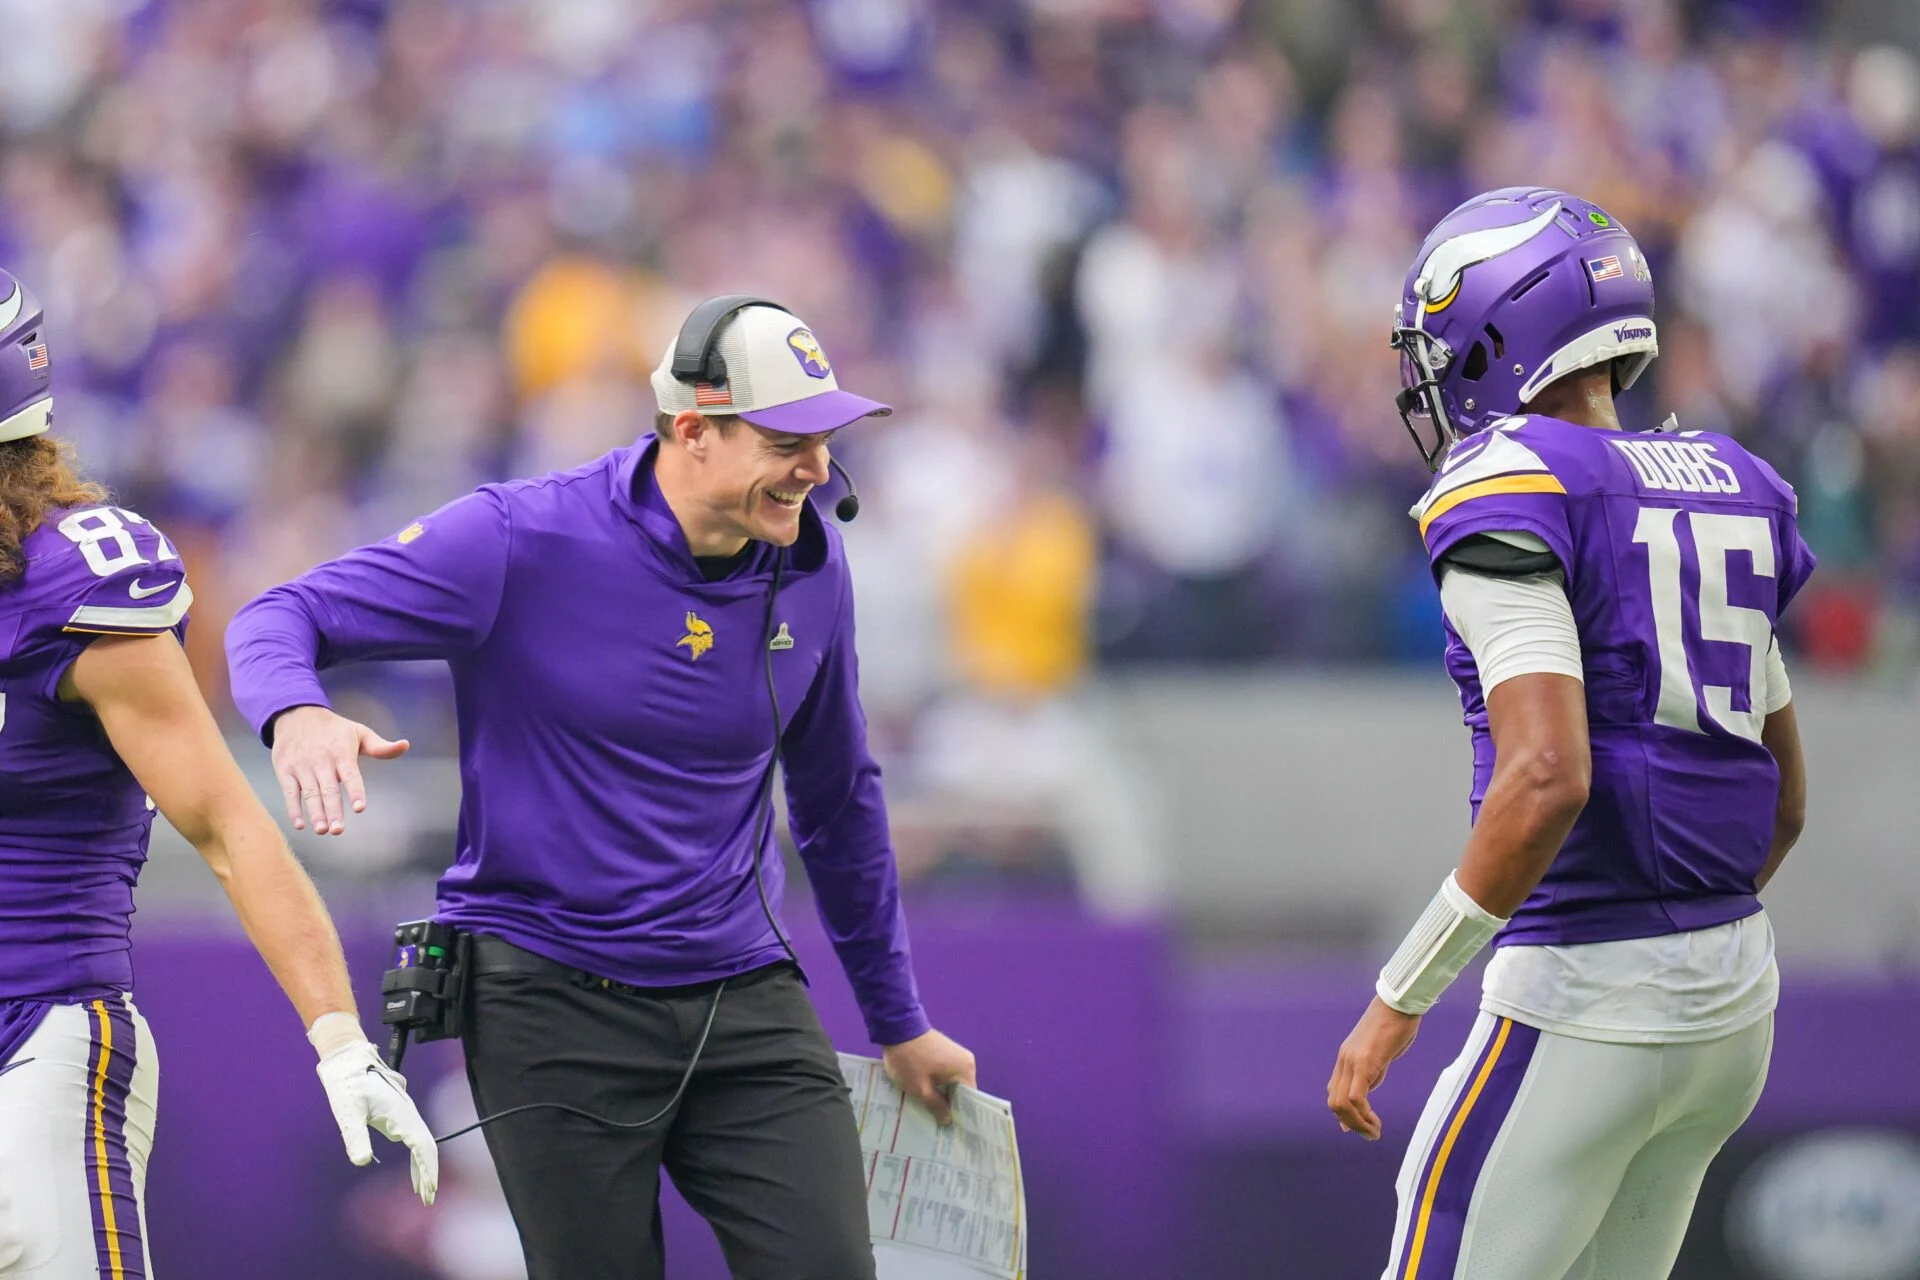 Who is the Coach of the Minnesota Vikings